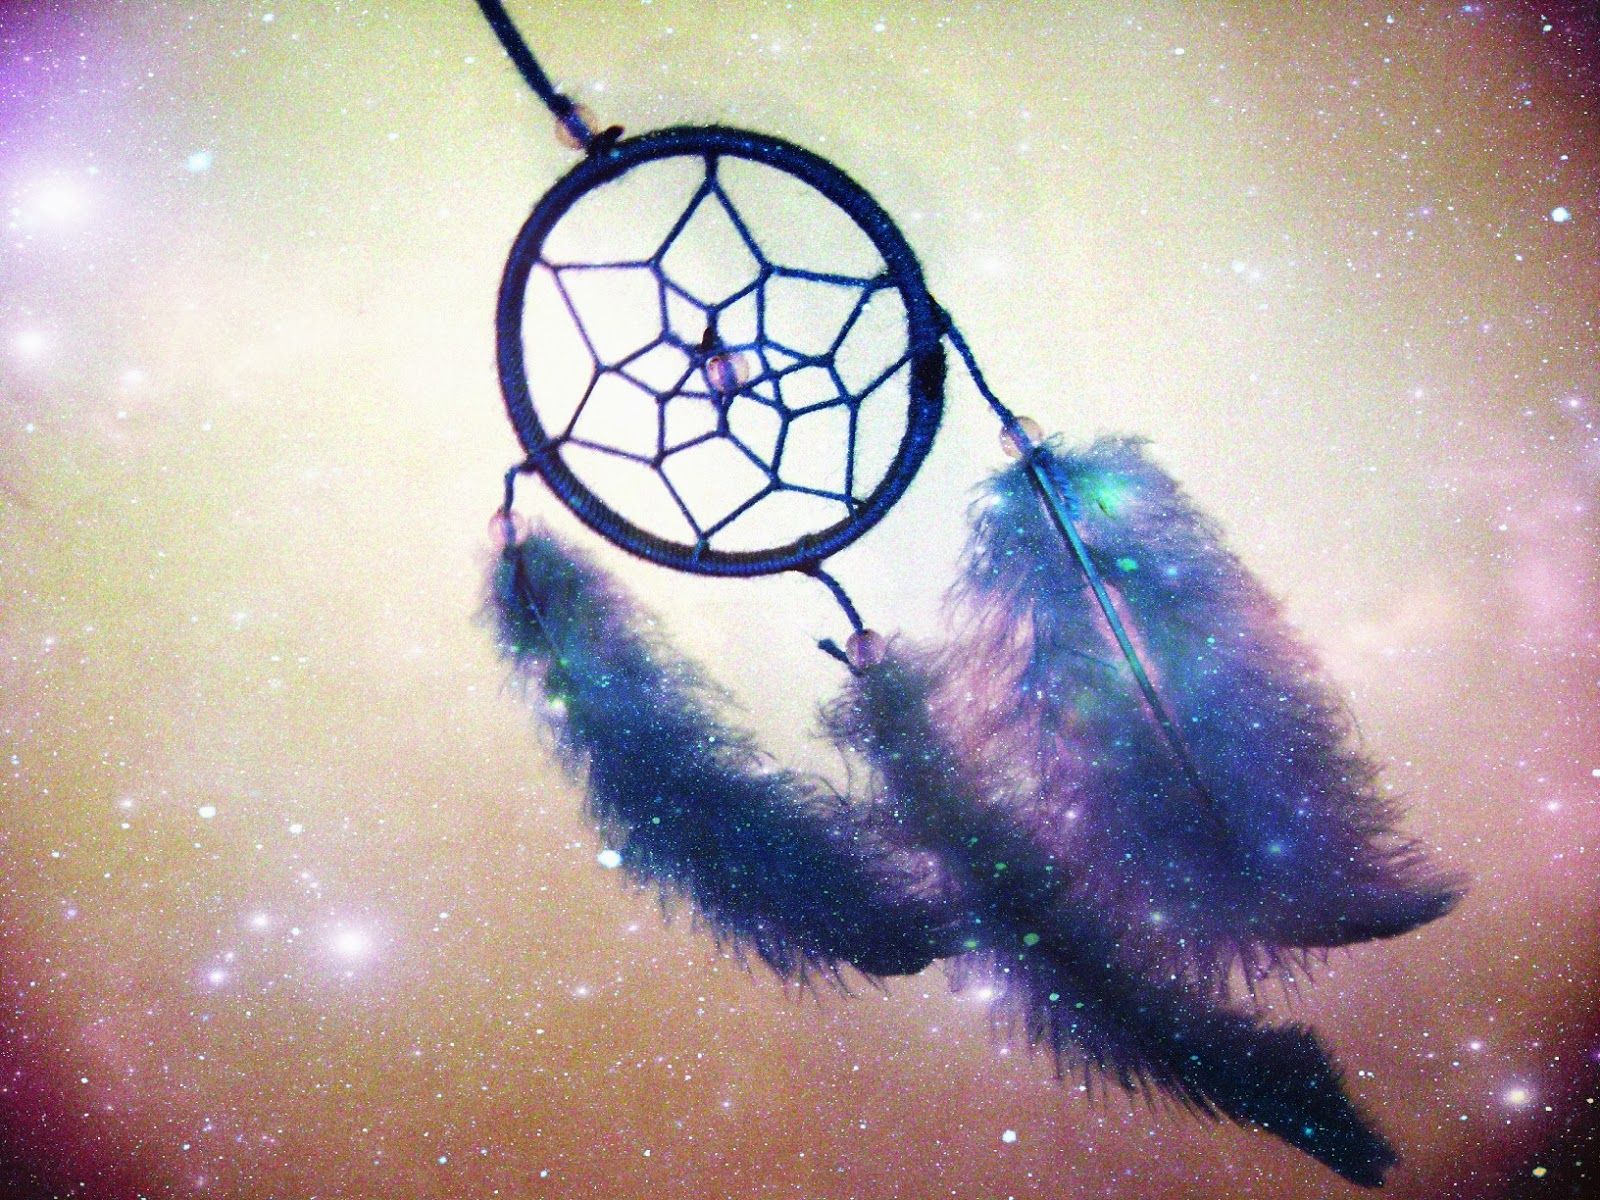 Dreamcatcher wallpapers HD - Beautiful wallpapers collection 2014